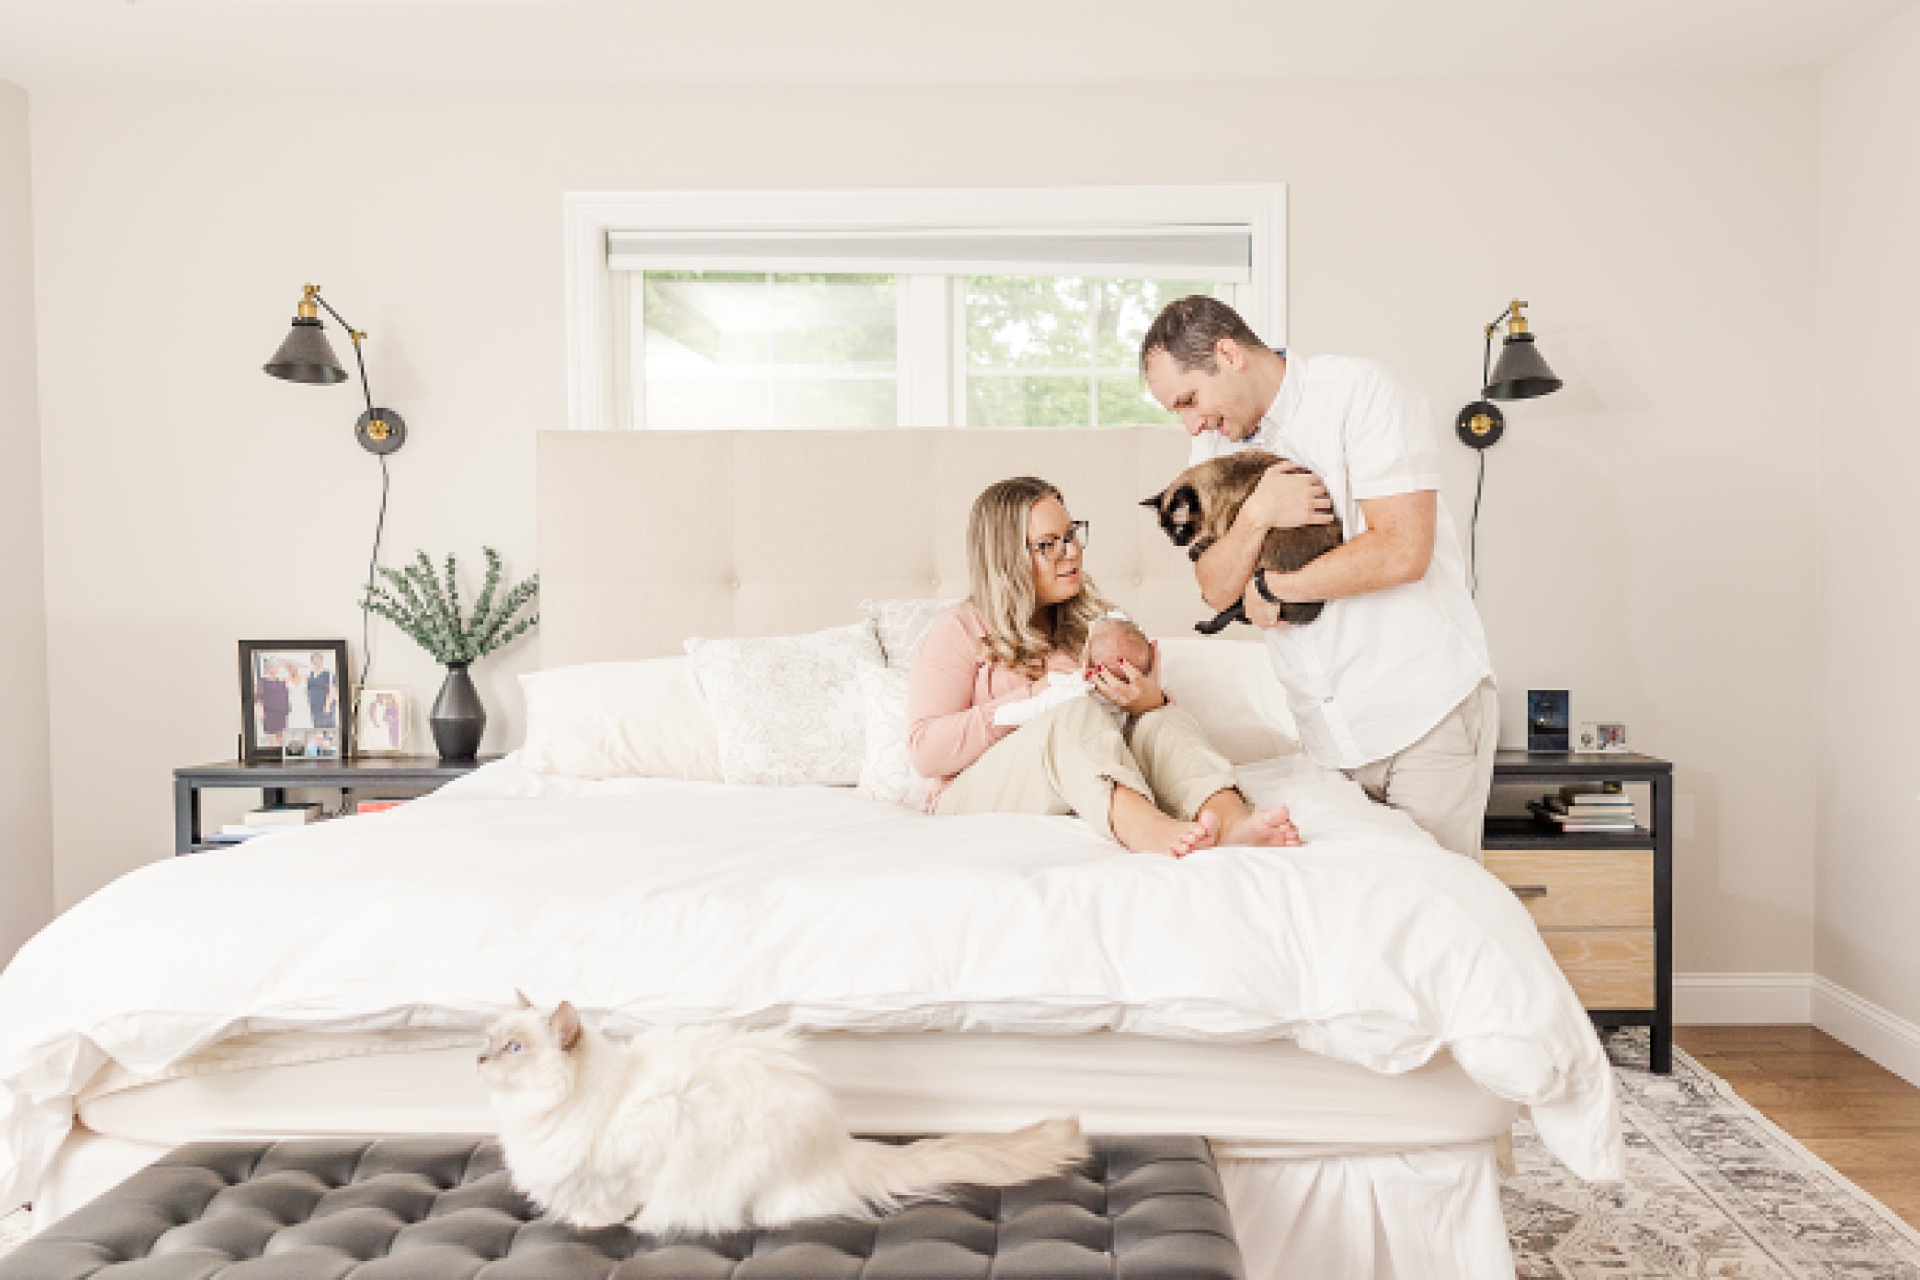 mom sits on bed with newborn an dad stands holding cat during in home newborn photo session with Sara Sniderman Photography in Natick Massachusetts